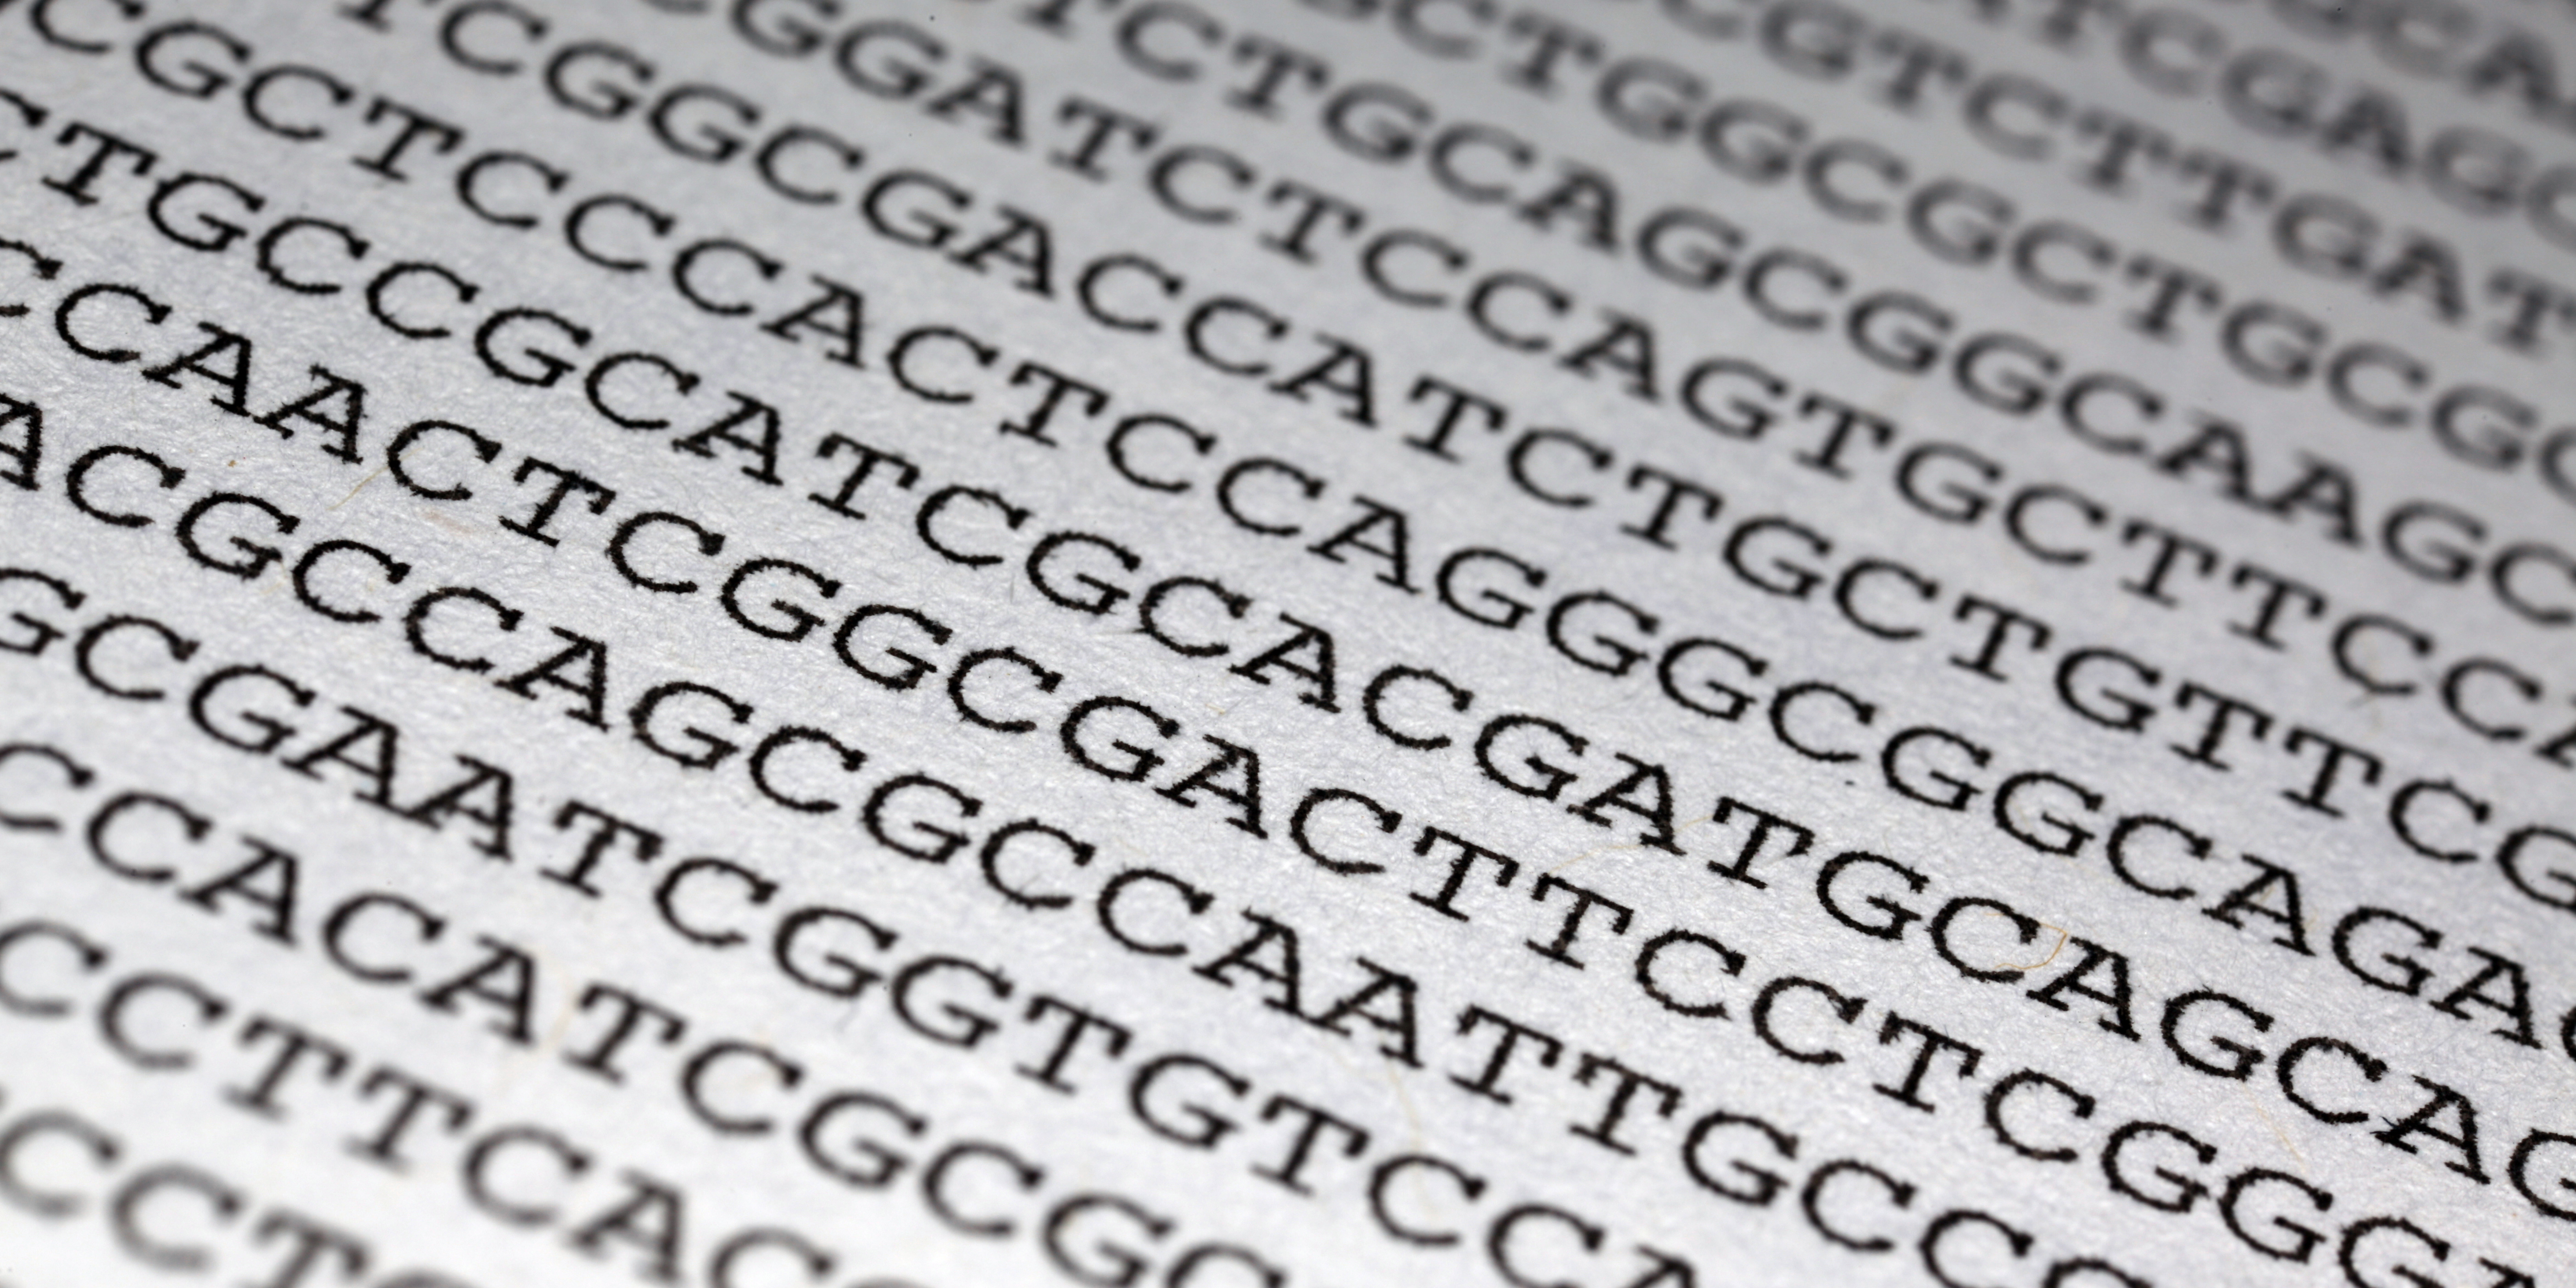 Genetic sequence on paper